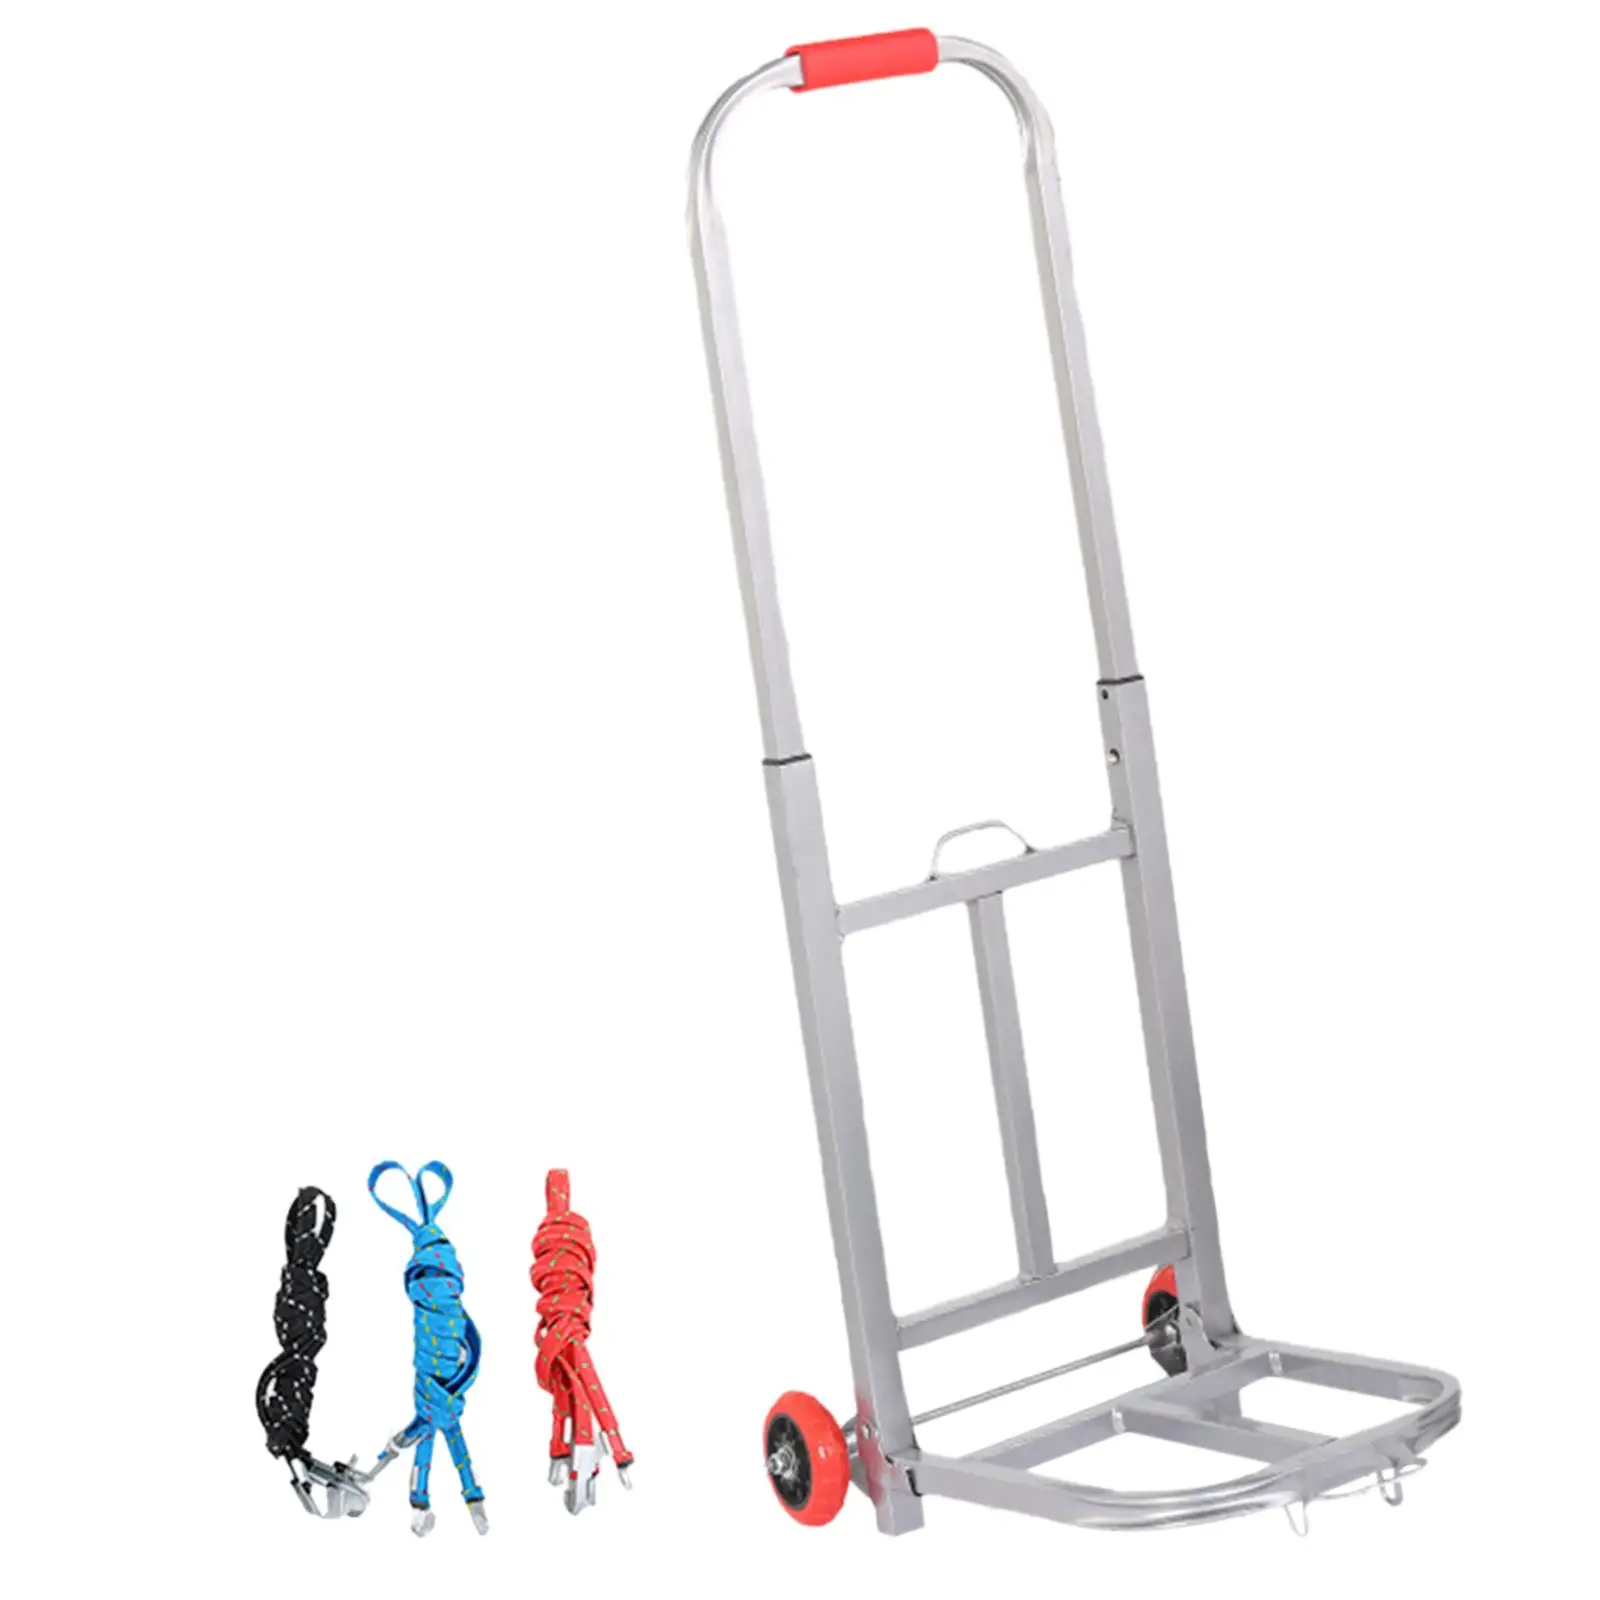 Collapsible Hand Truck Luggage Trolley Cart with 2 Wheels Sturdy Adjustable Handle Shopping Cart Show Exhibitors